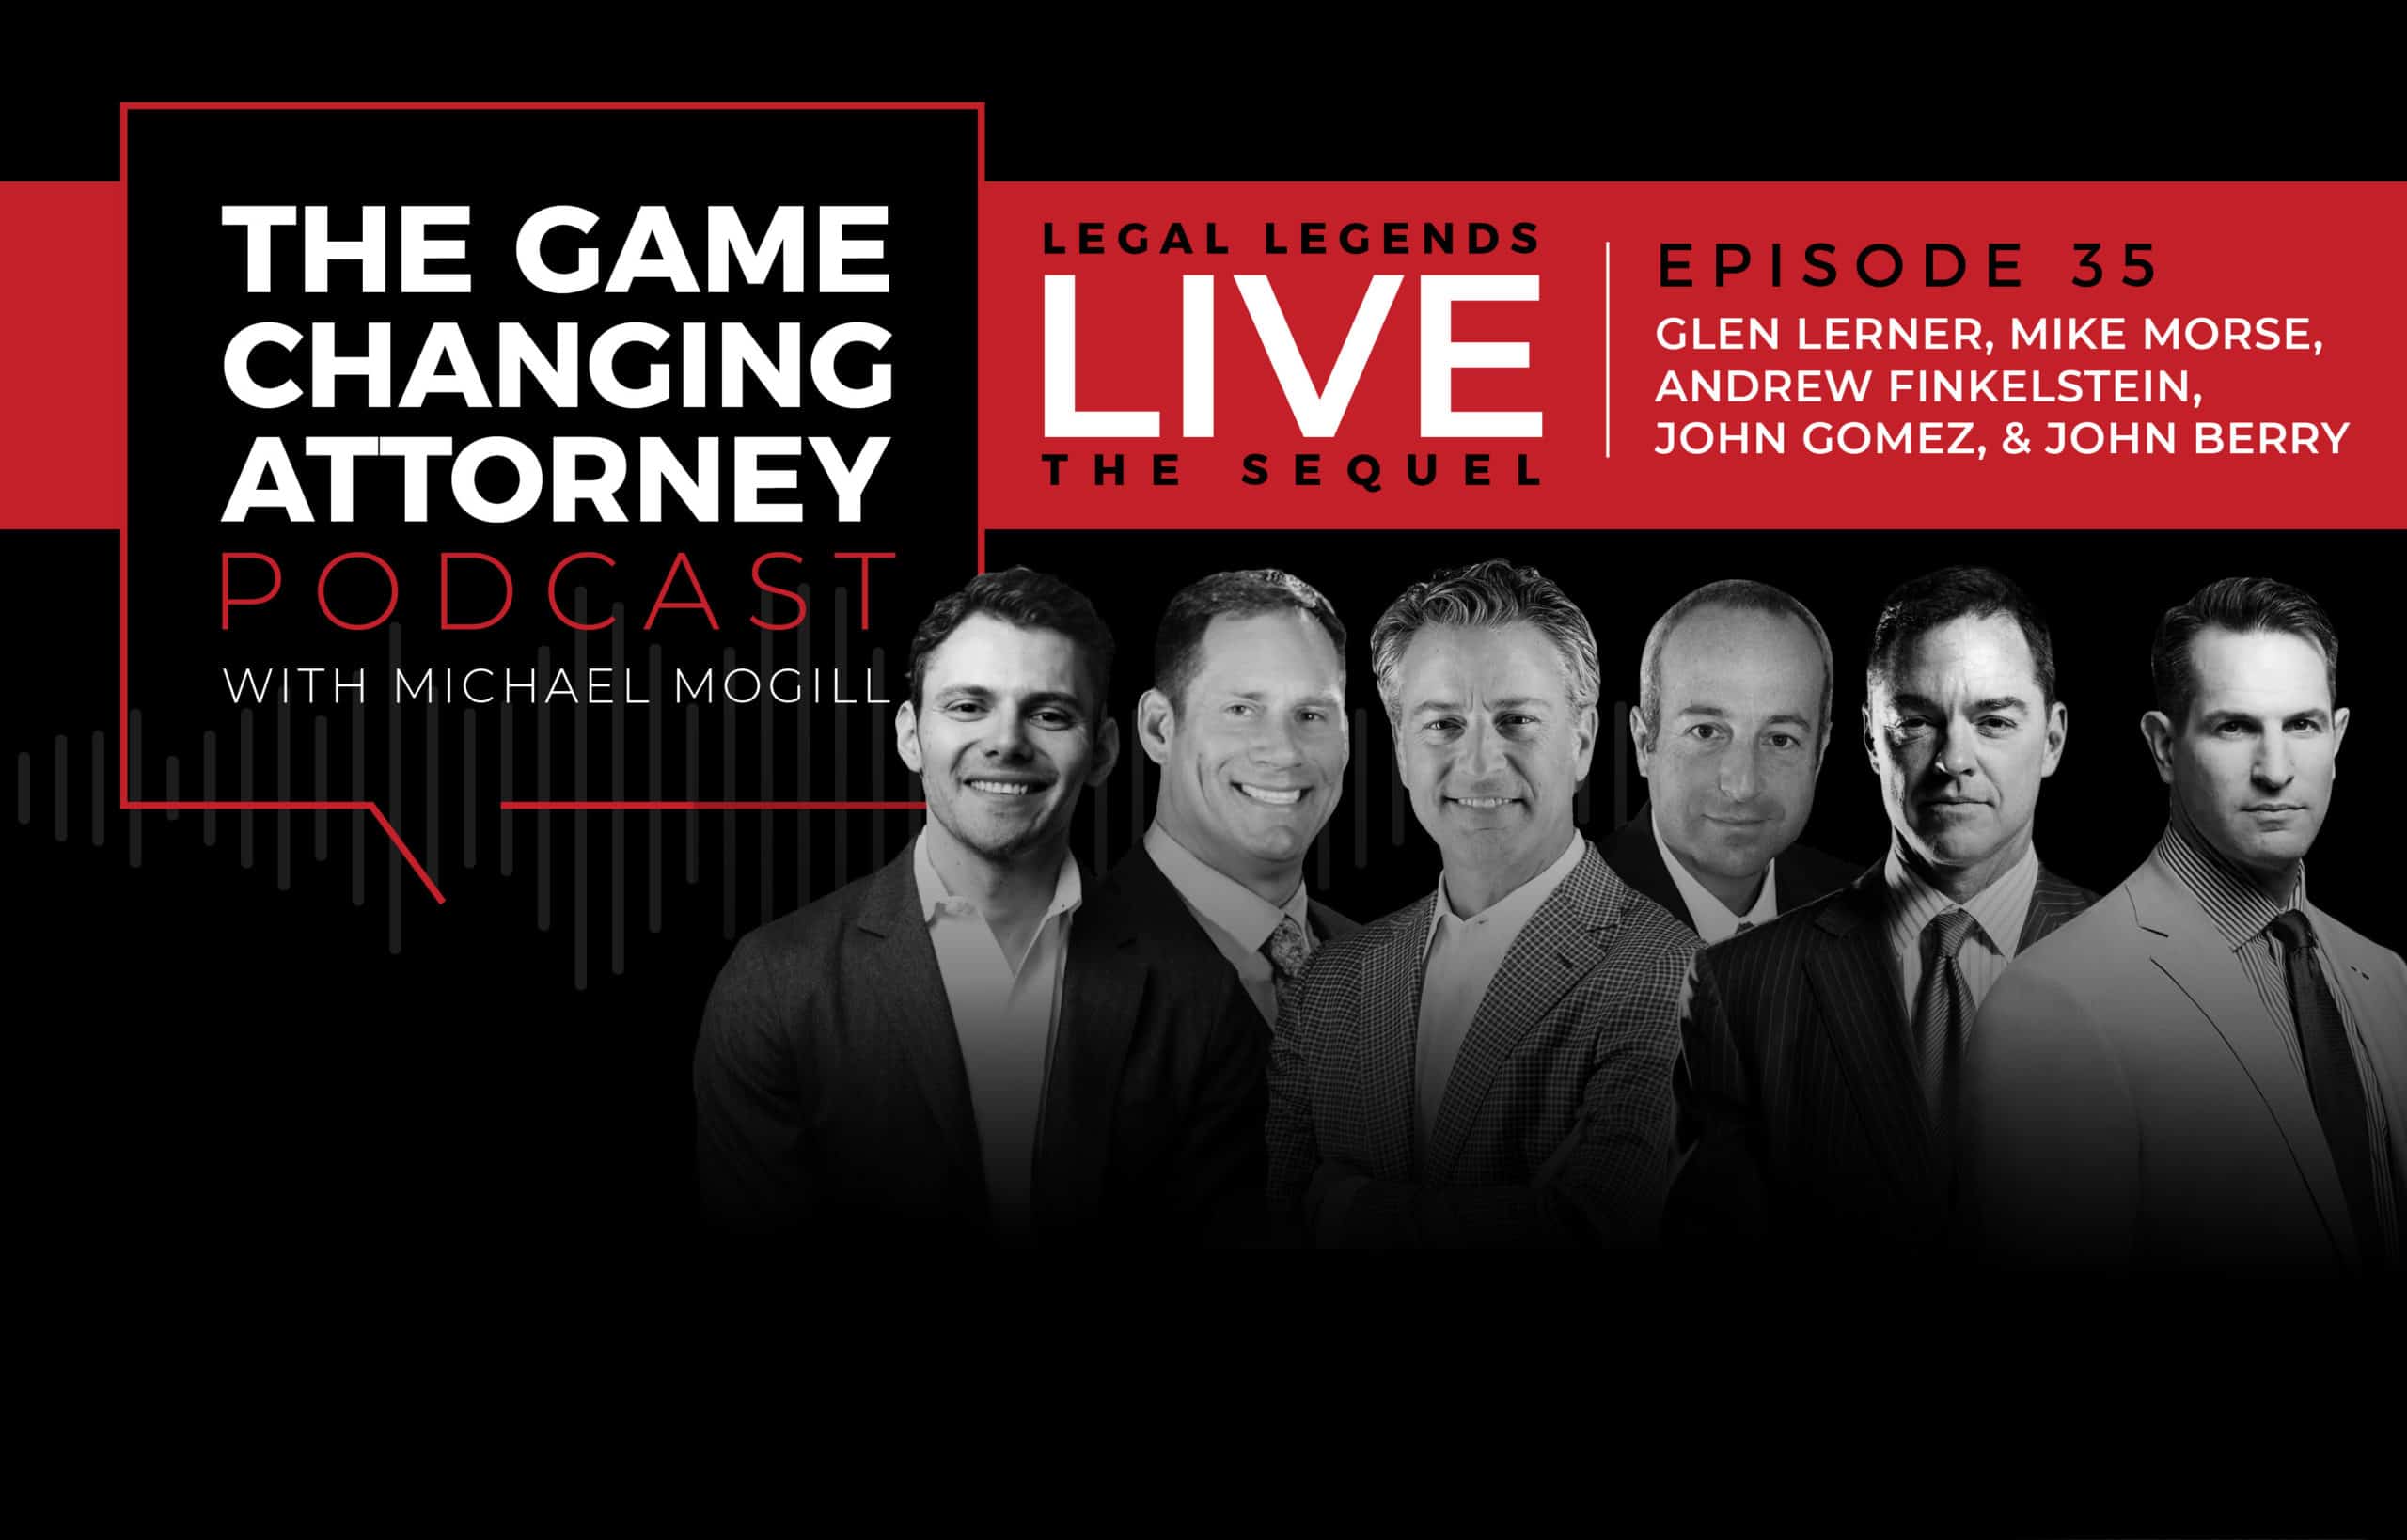 Legal Legends Live 2 - The Game Changing Attorney Podcast - Mobile